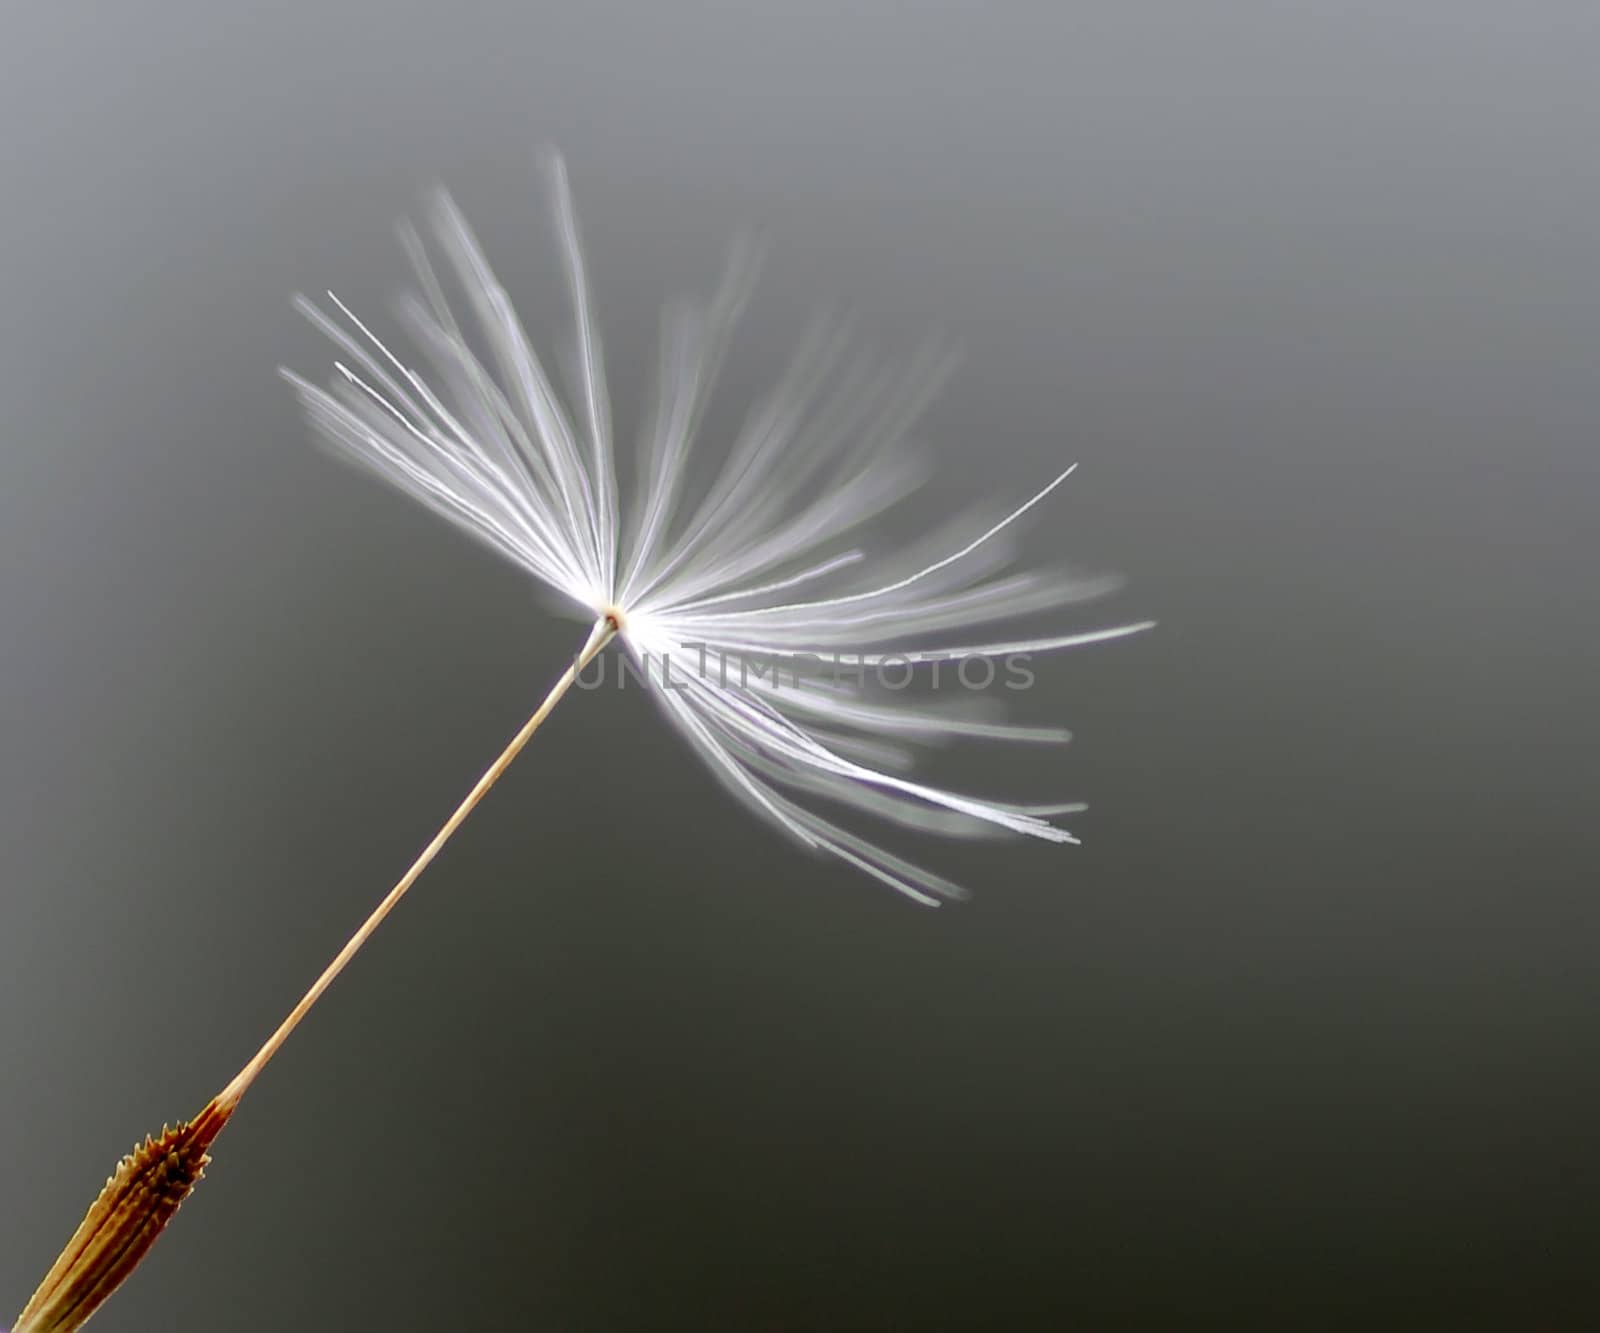 Extreme closeup of a single dandelions seed